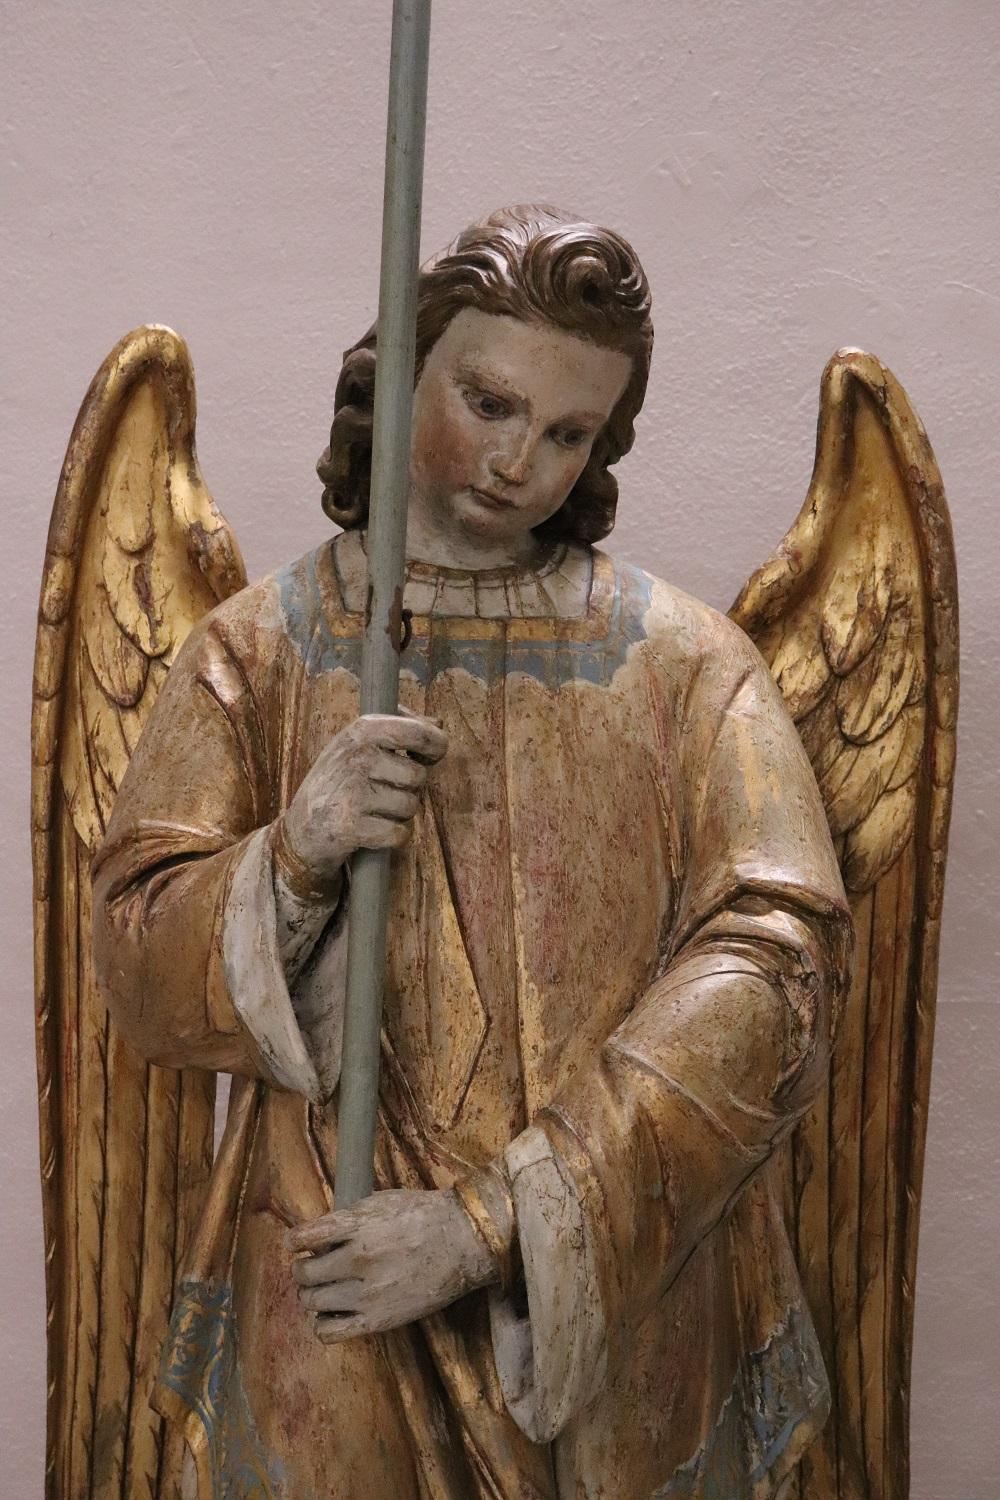 Rare antique angel sculpture. The angel is completely lacquered and gilded with large wings, holding a large candle. They are fantastic large in size made of hand carved wood and gilded with gold leaf. The gold has acquired a beautiful old patina.